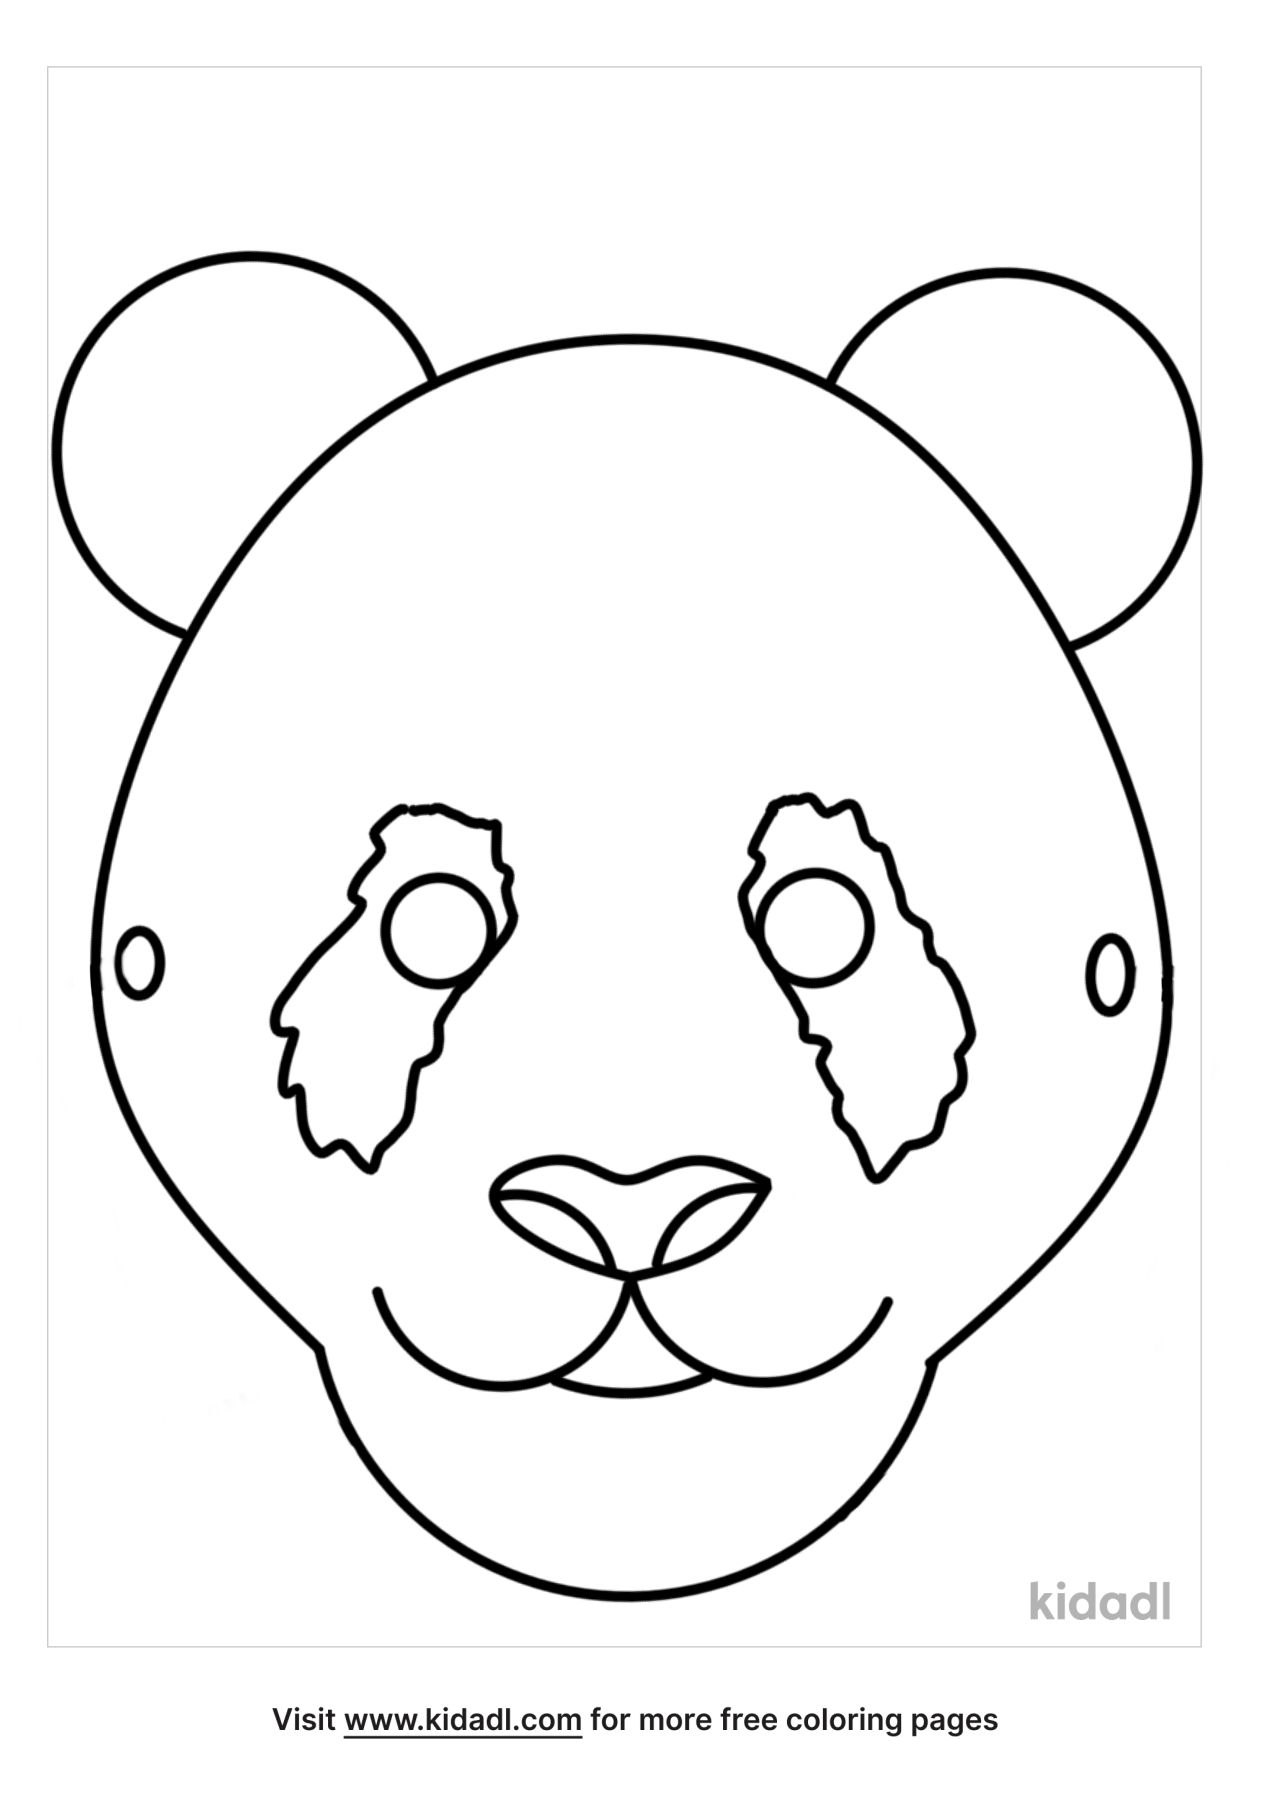 Animal Mask Coloring Pages | Free Animals Coloring Pages | Kidadl